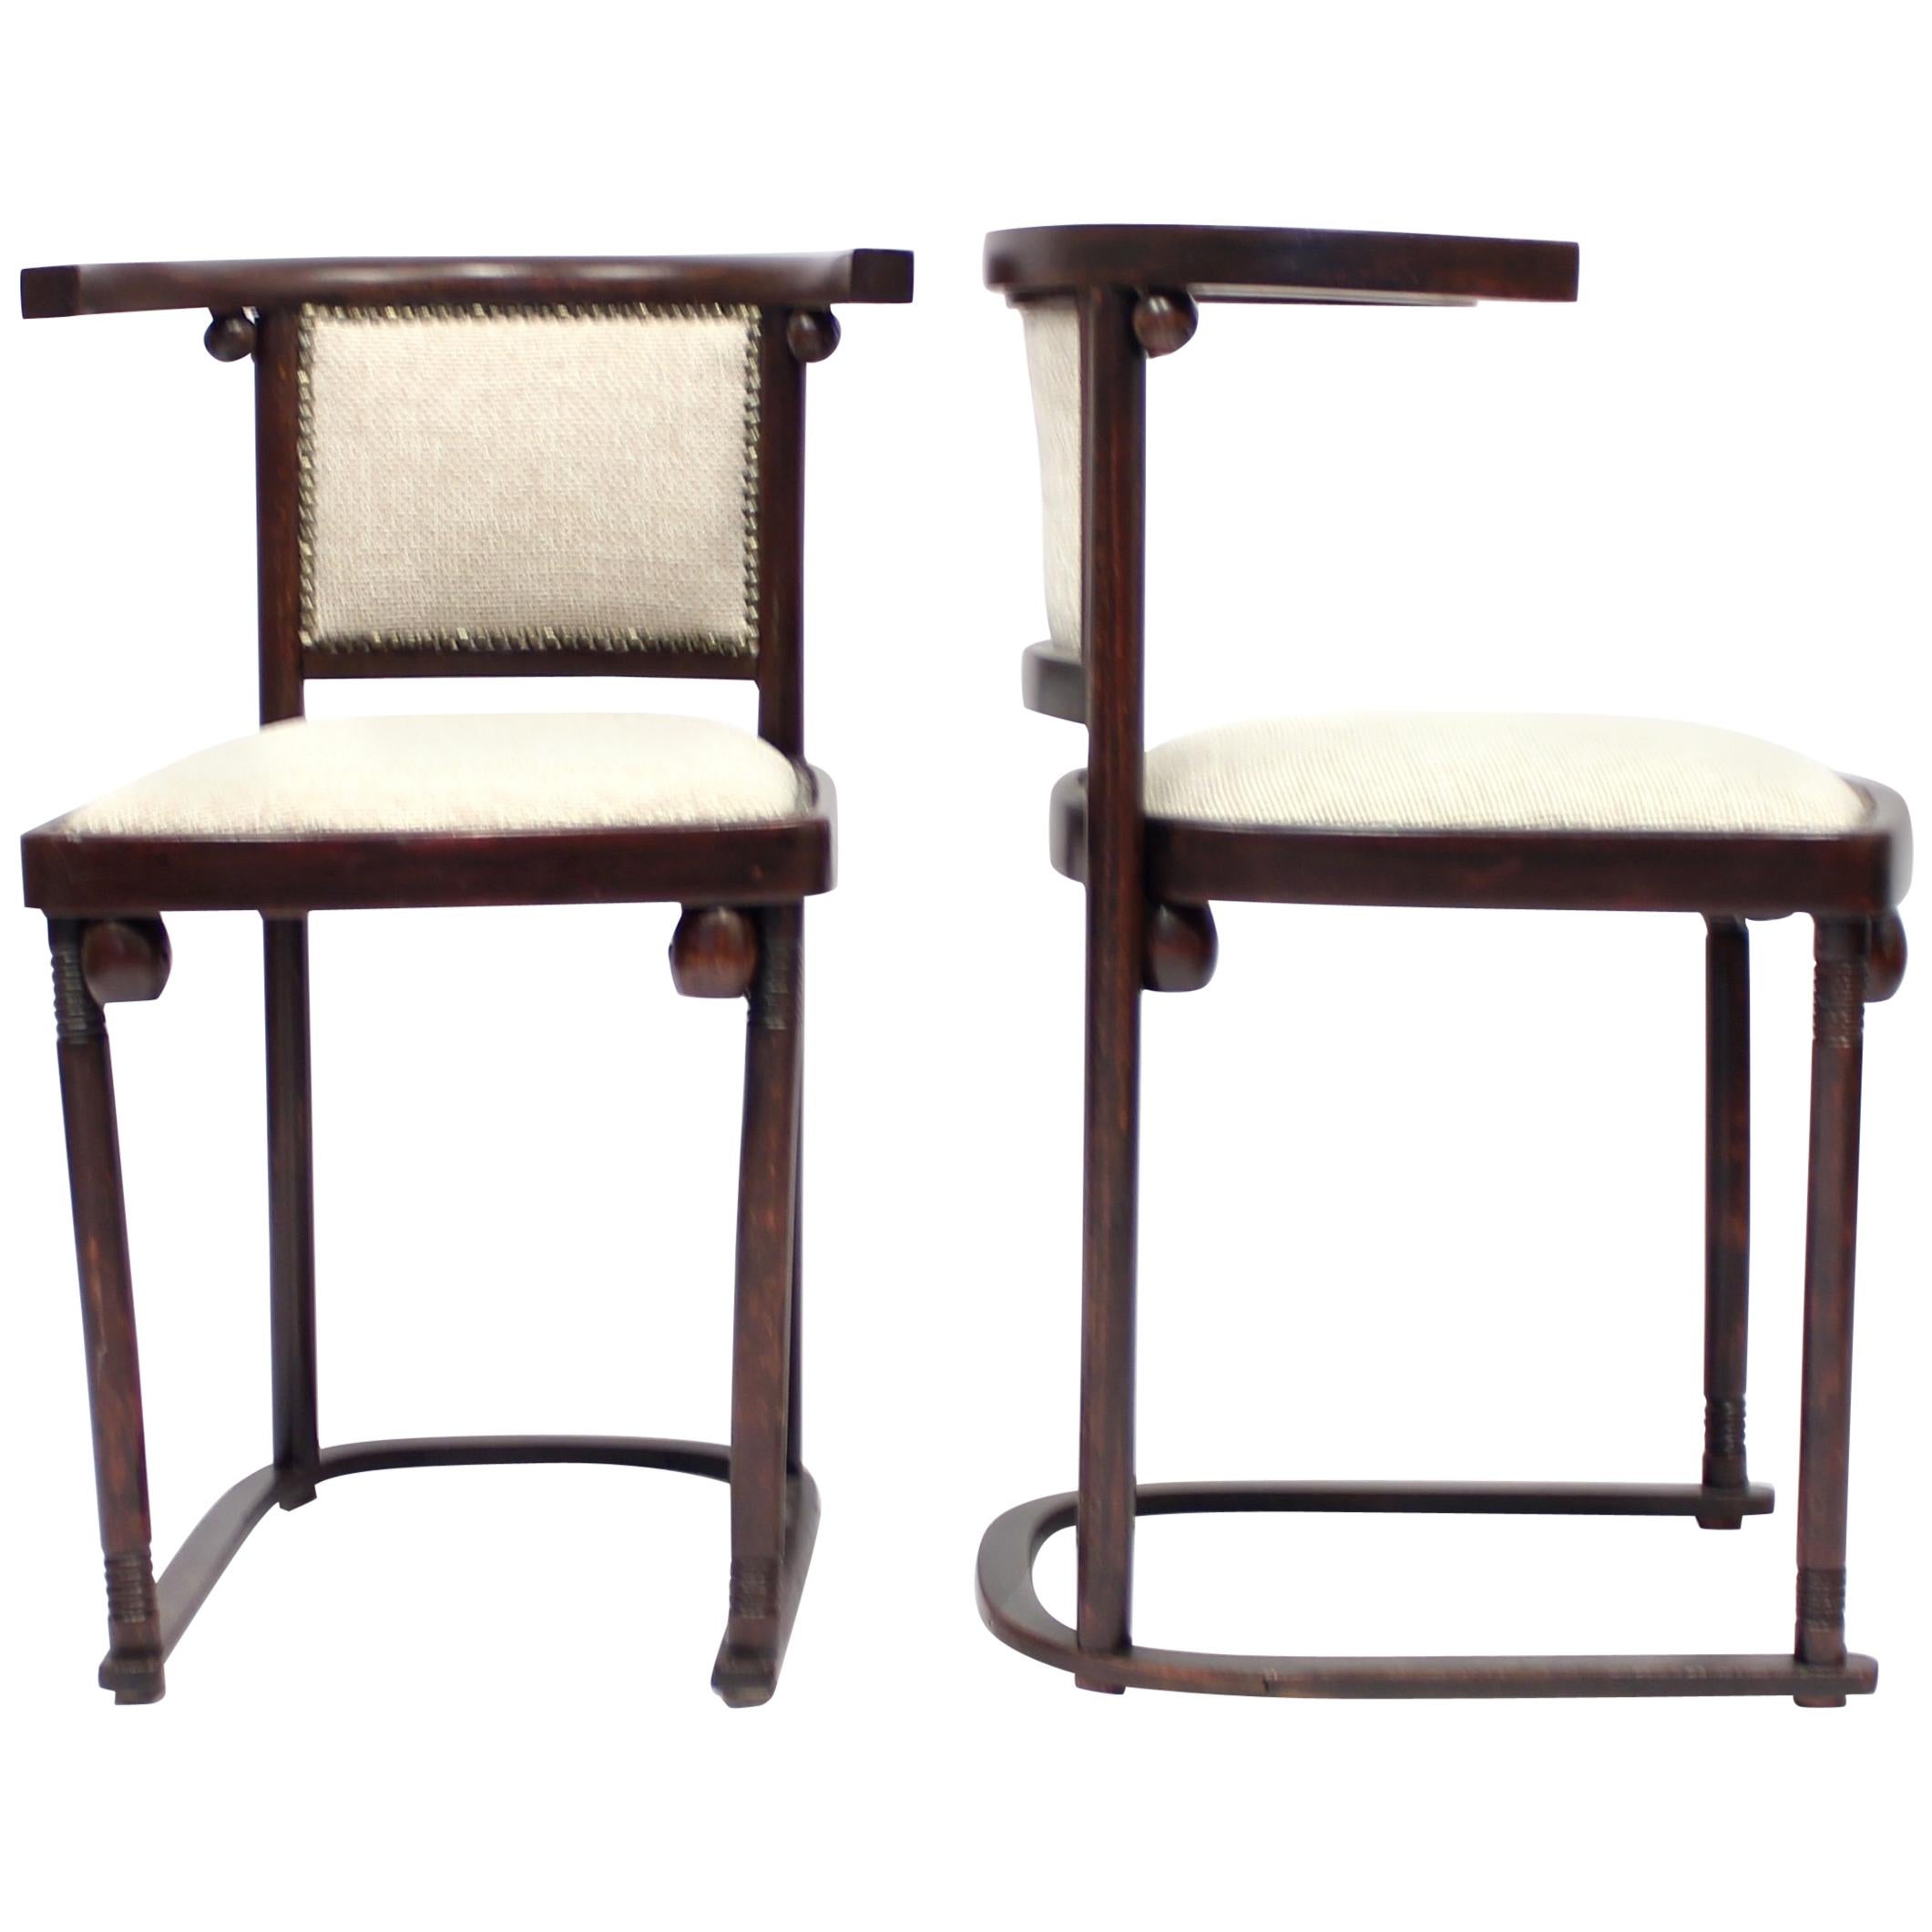 Cabaret Fledermaus Chairs by Josef Hoffmann for Thonet, Set of Two